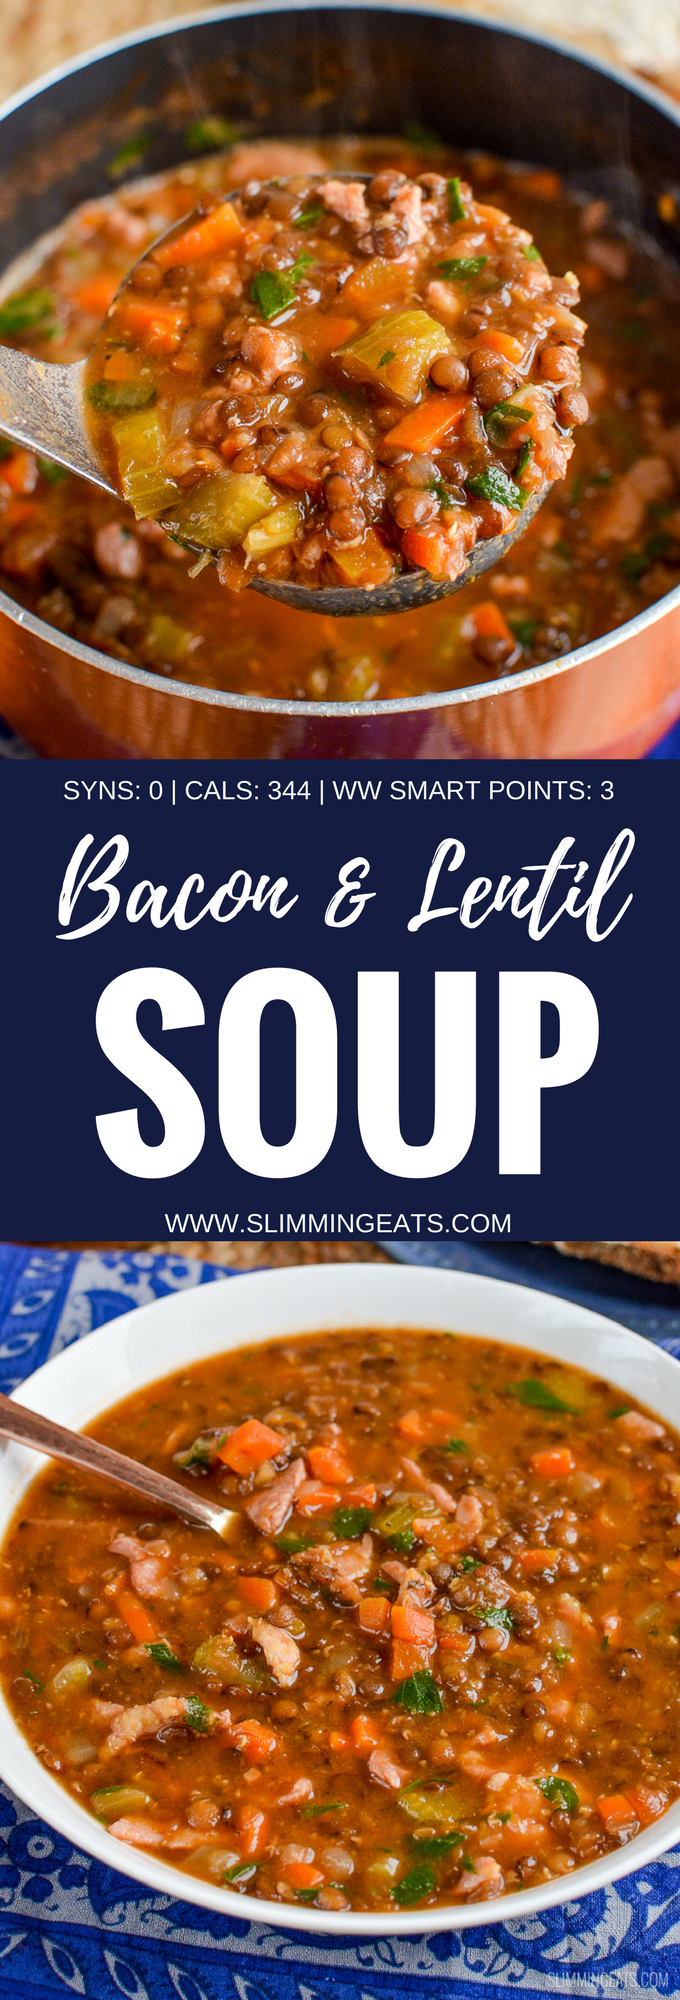 Slimming Eats Syn Free Bacon and Lentil Soup - gluten free, dairy free, Slimming World and Weight Watchers friendly